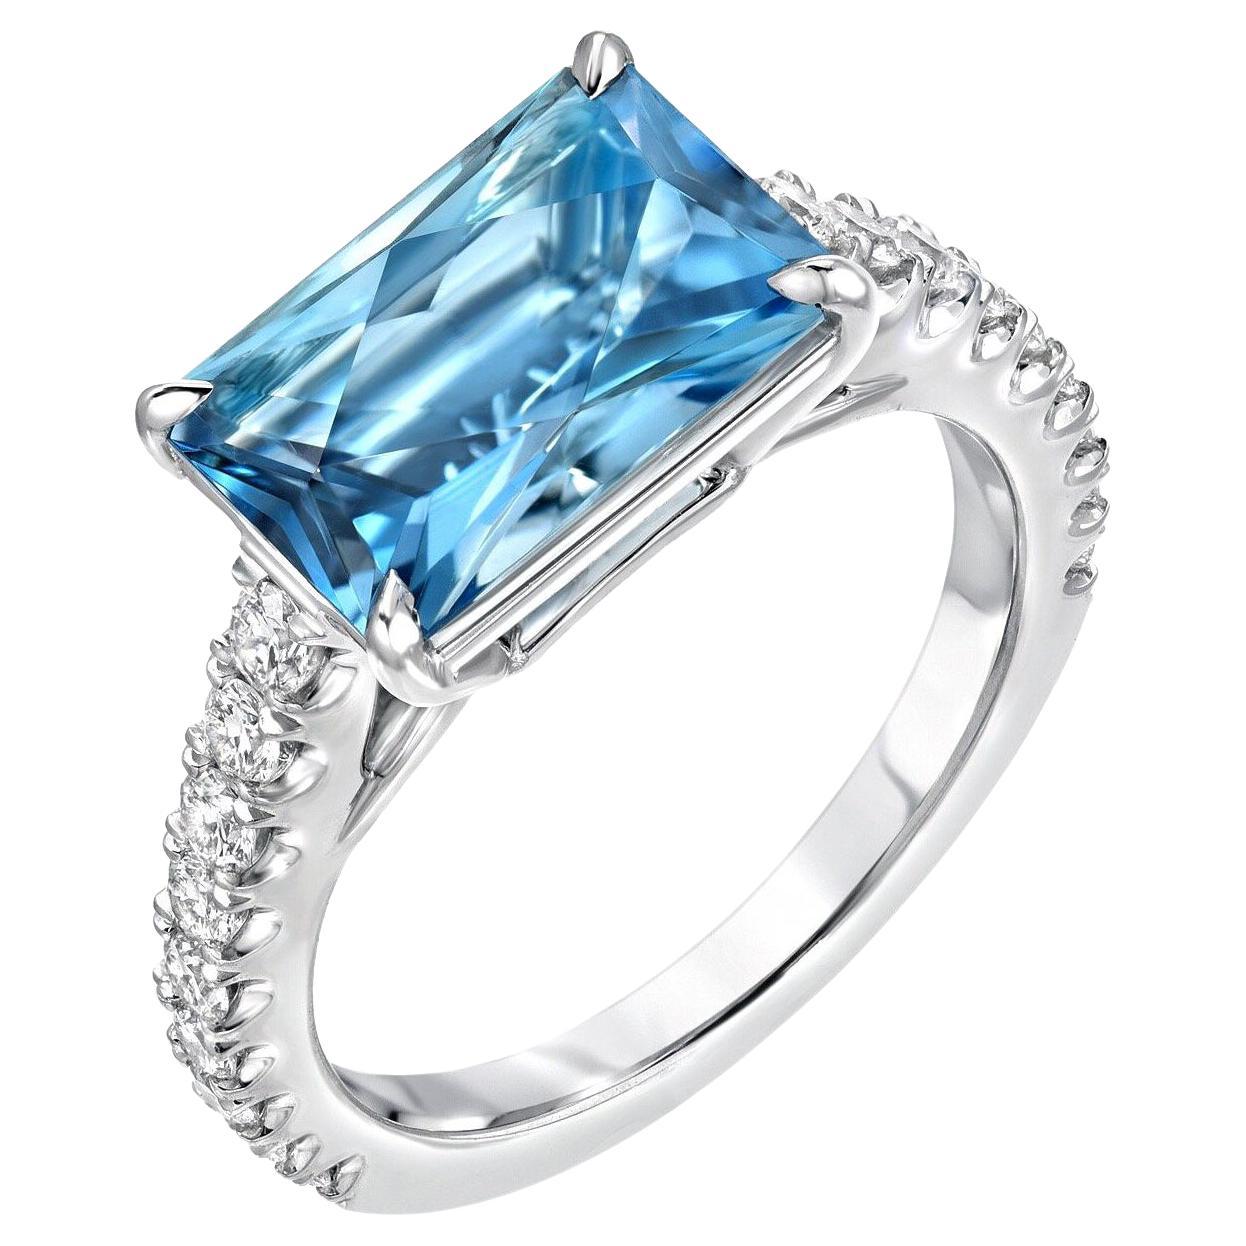 This unique, custom cut 2.59 carat Aquamarine, blends an emerald cut outline with a radiant cut, to maximize the brilliance of the gem. It is hand set horizontally in a striking 0.52 carat round brilliant diamond platinum cocktail ring, crafted